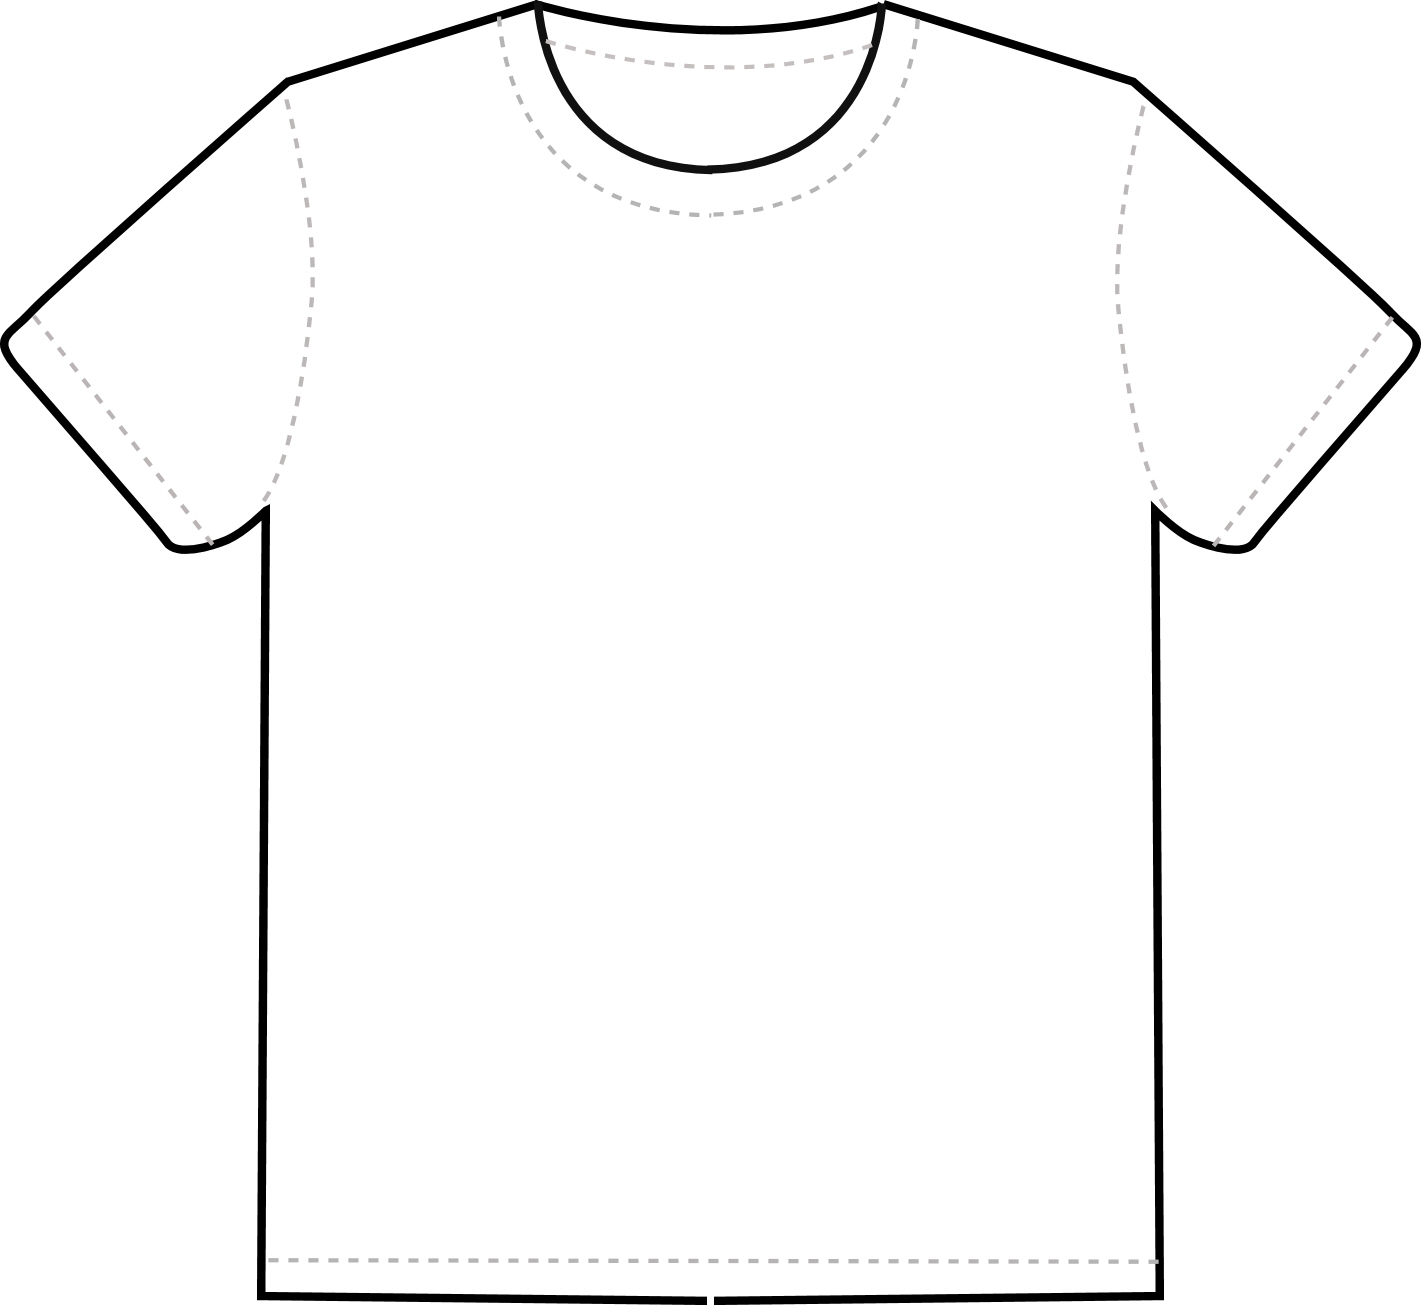 free baseball clipart for t shirts - photo #38